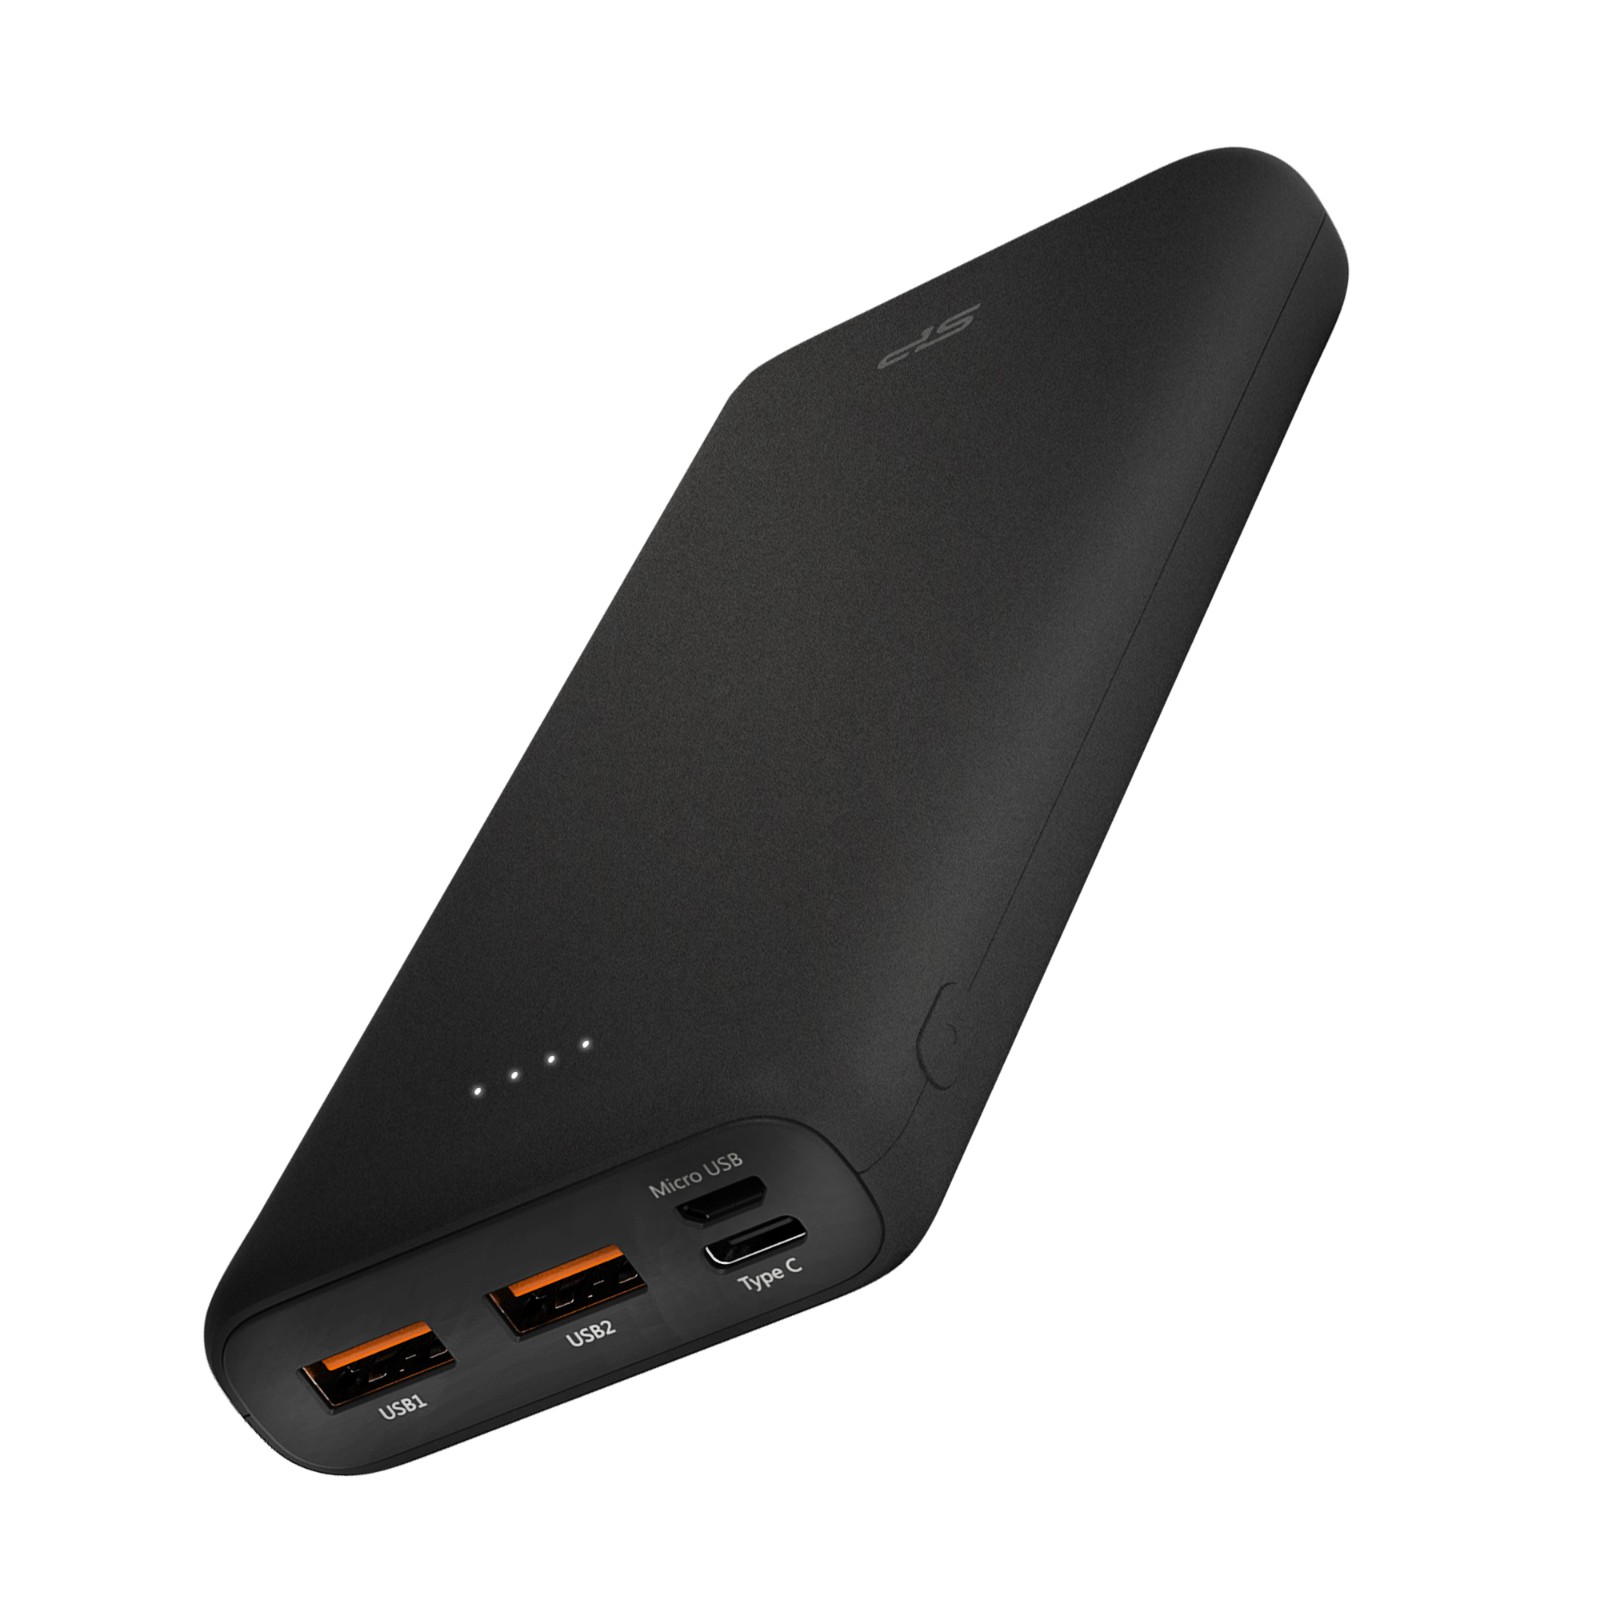 Silicon Power C20QC 20000mAh Quick Charge 3.0 USB C Powerbank Portable Charger, Black